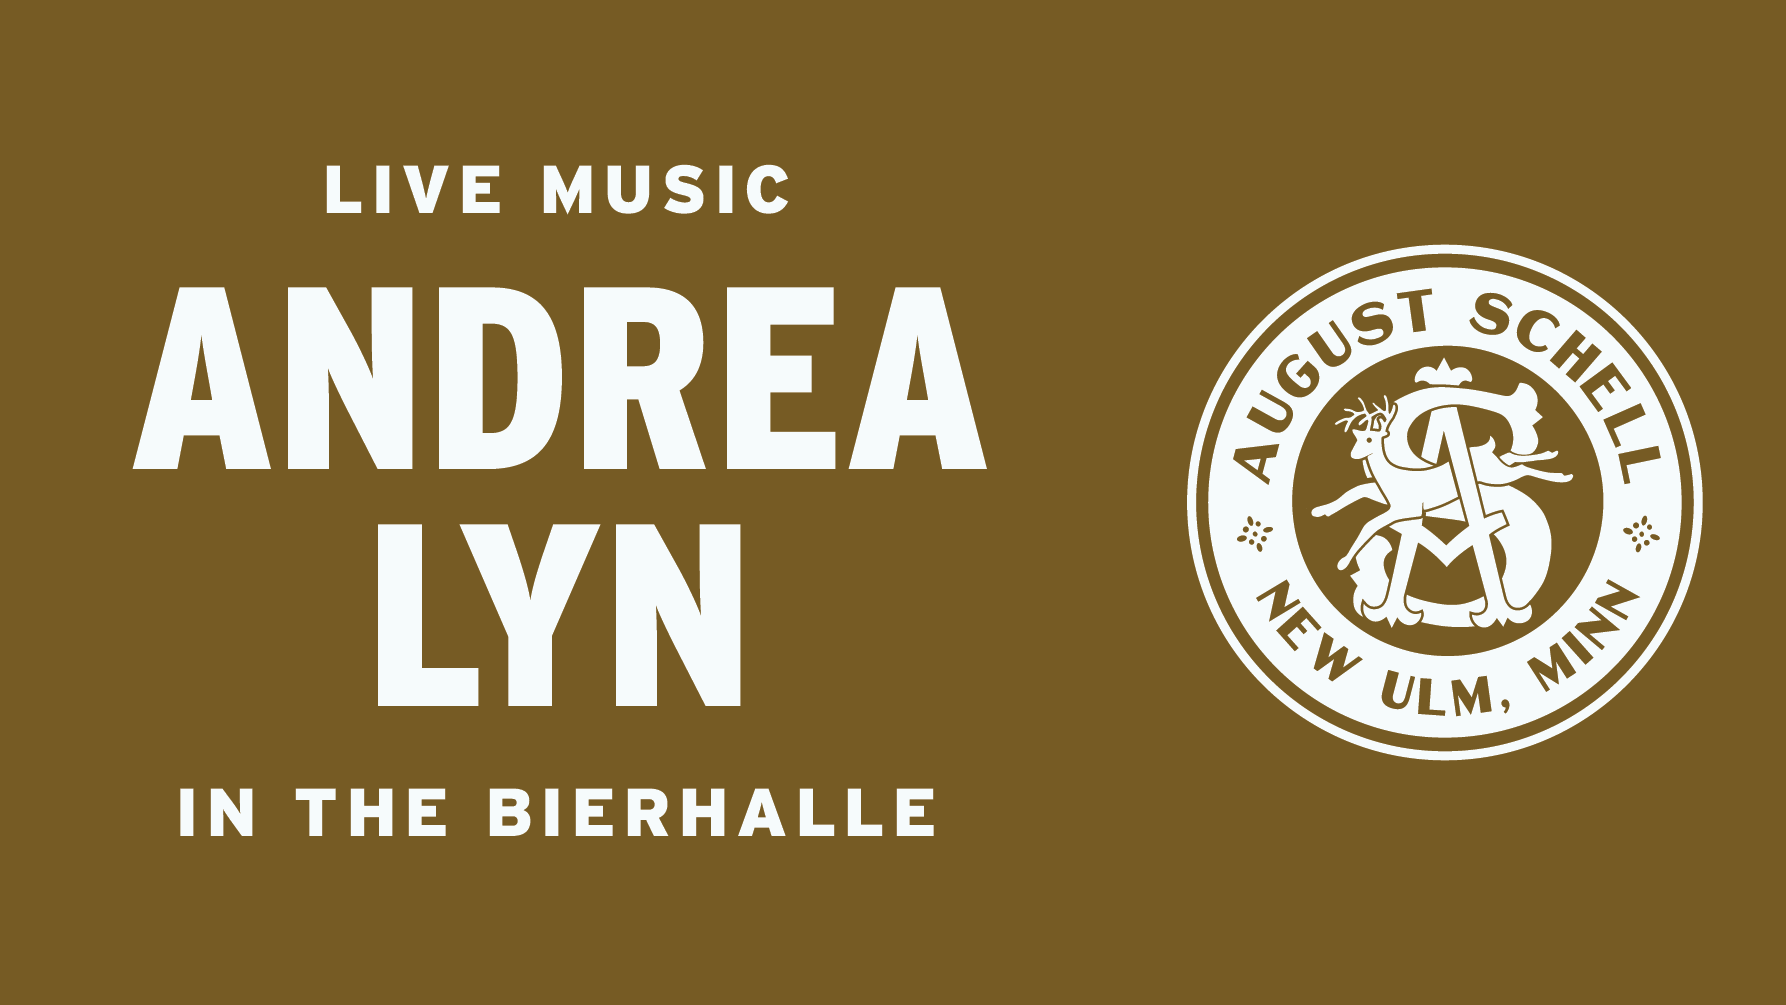 TEXT: Live Music from Andrea Lynn in the Bierhalle LOGO: August Schell Brewing